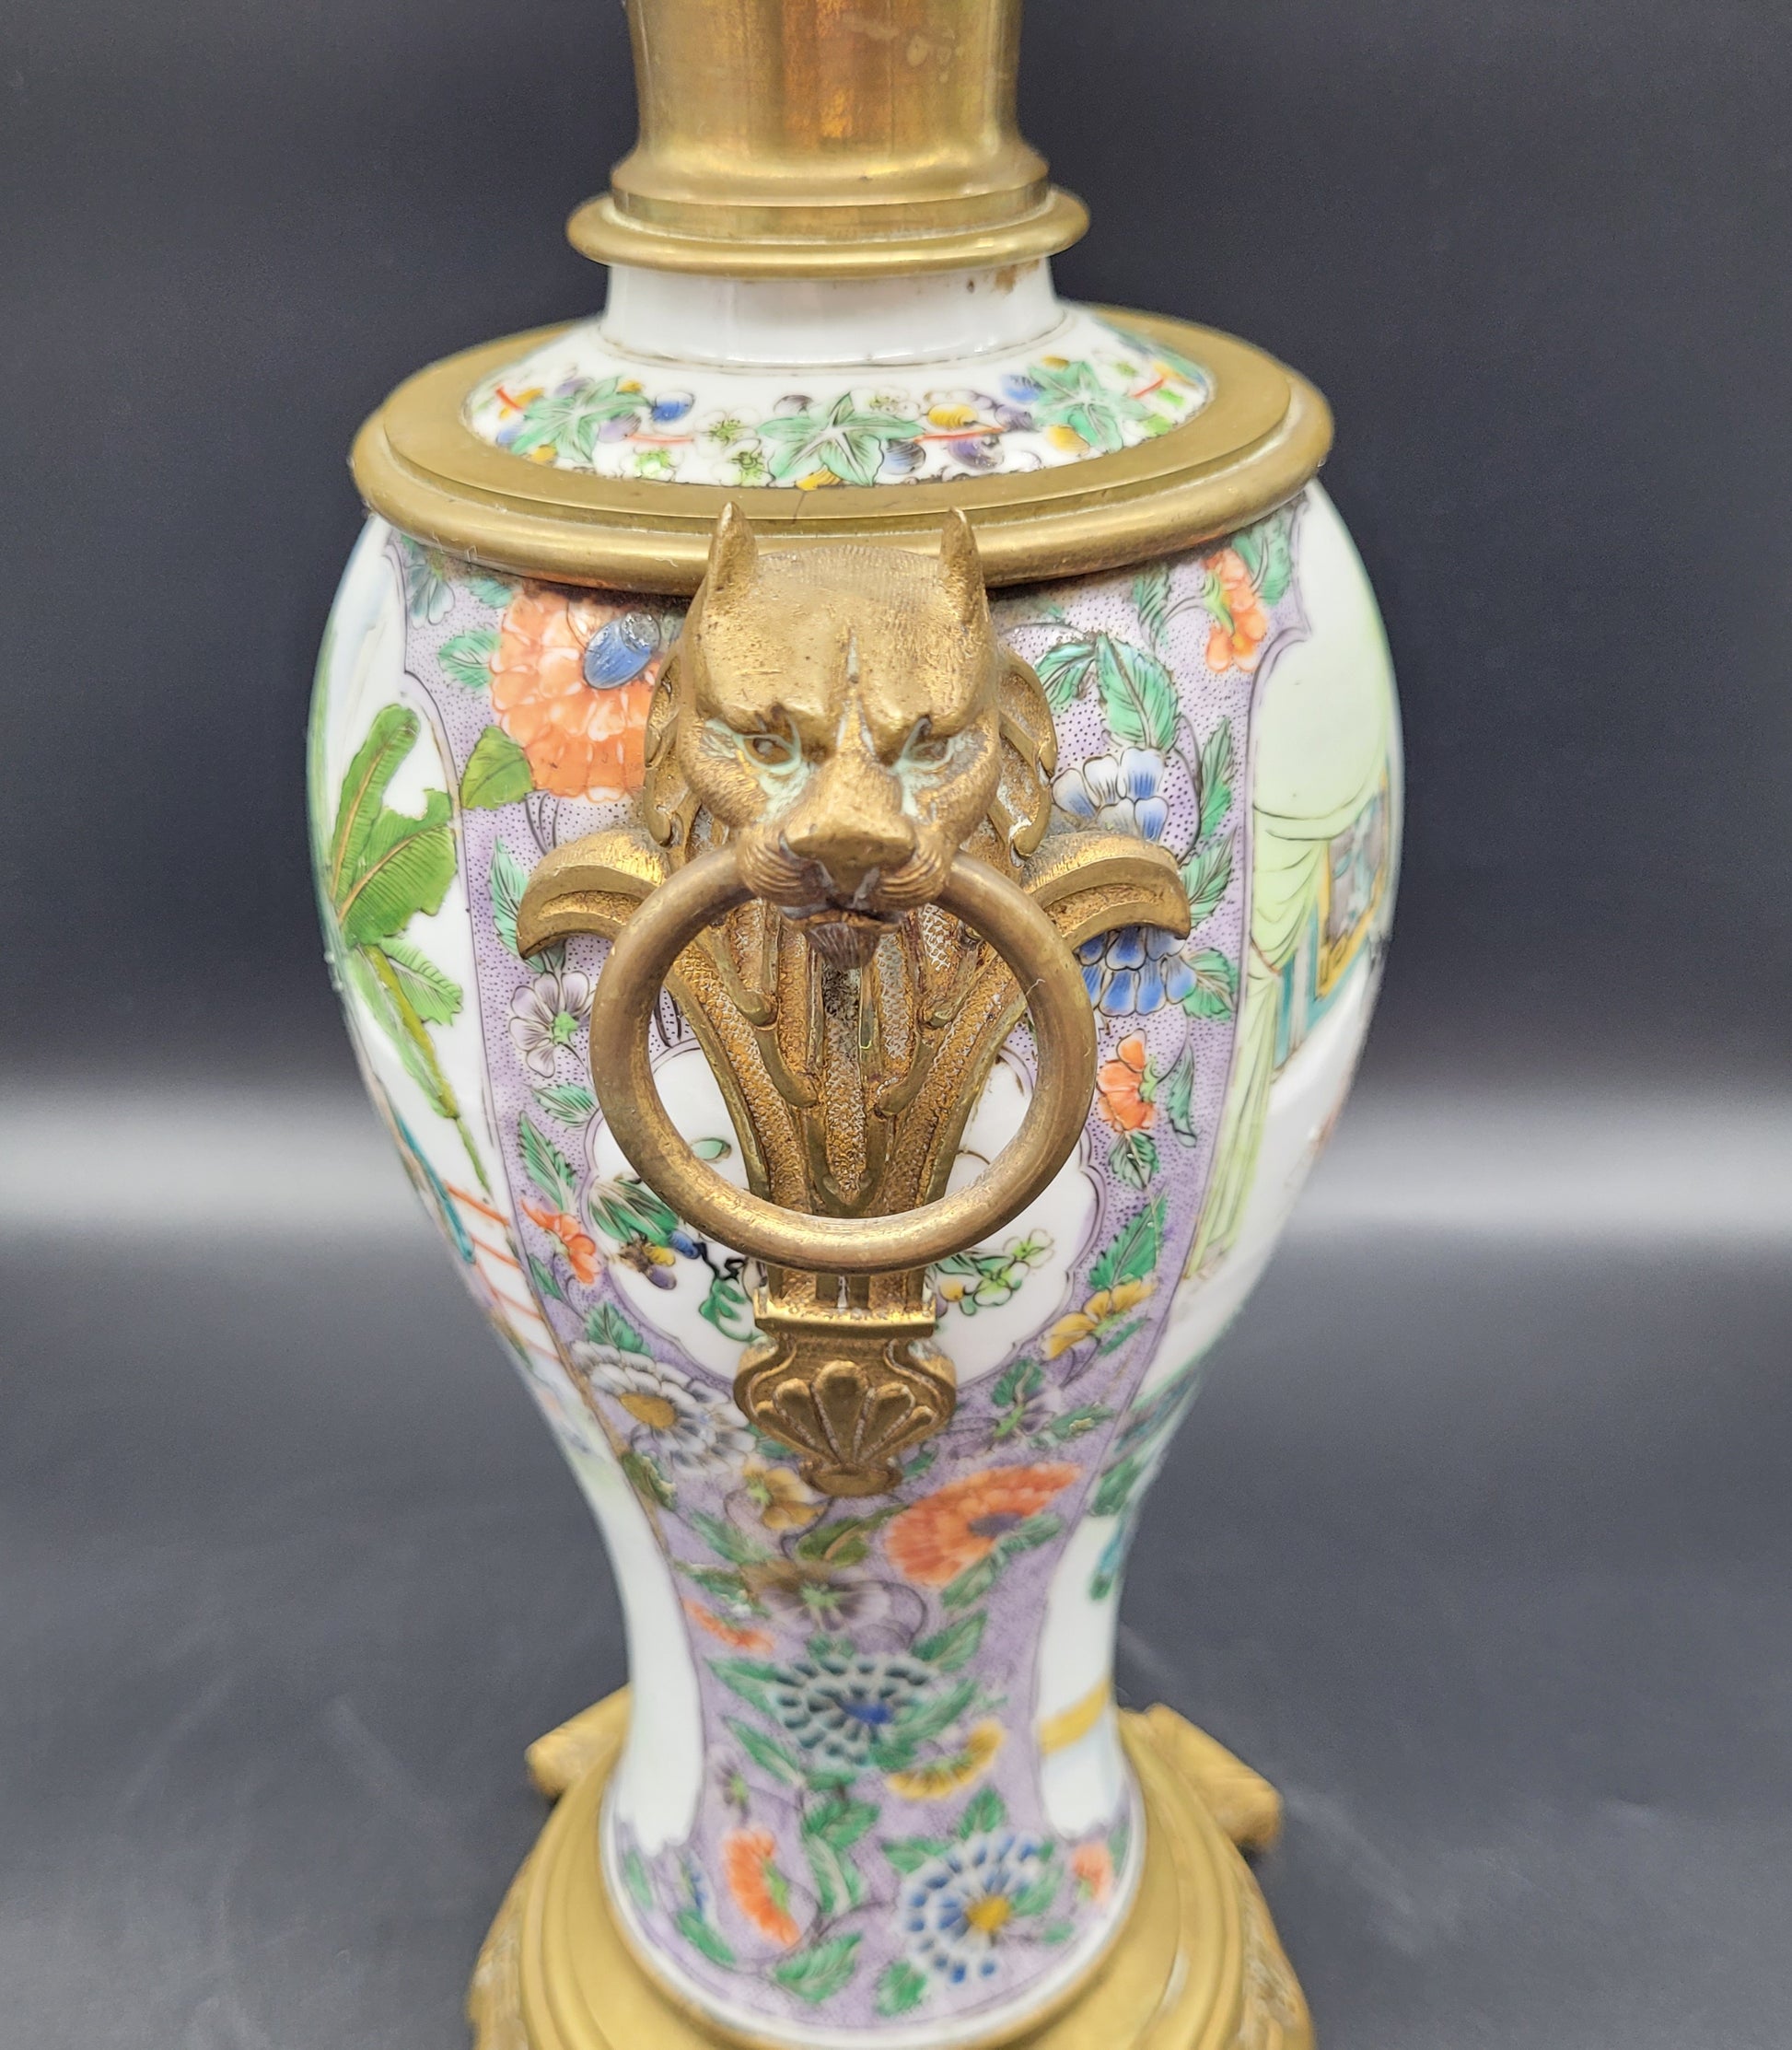  Car boot sale finds UK Beautiful Antique Chinese 18th /19th Century Famille Vert Vase With High Quality Ormolu Mounts. K.B ANTIQUES & JEWELLERY